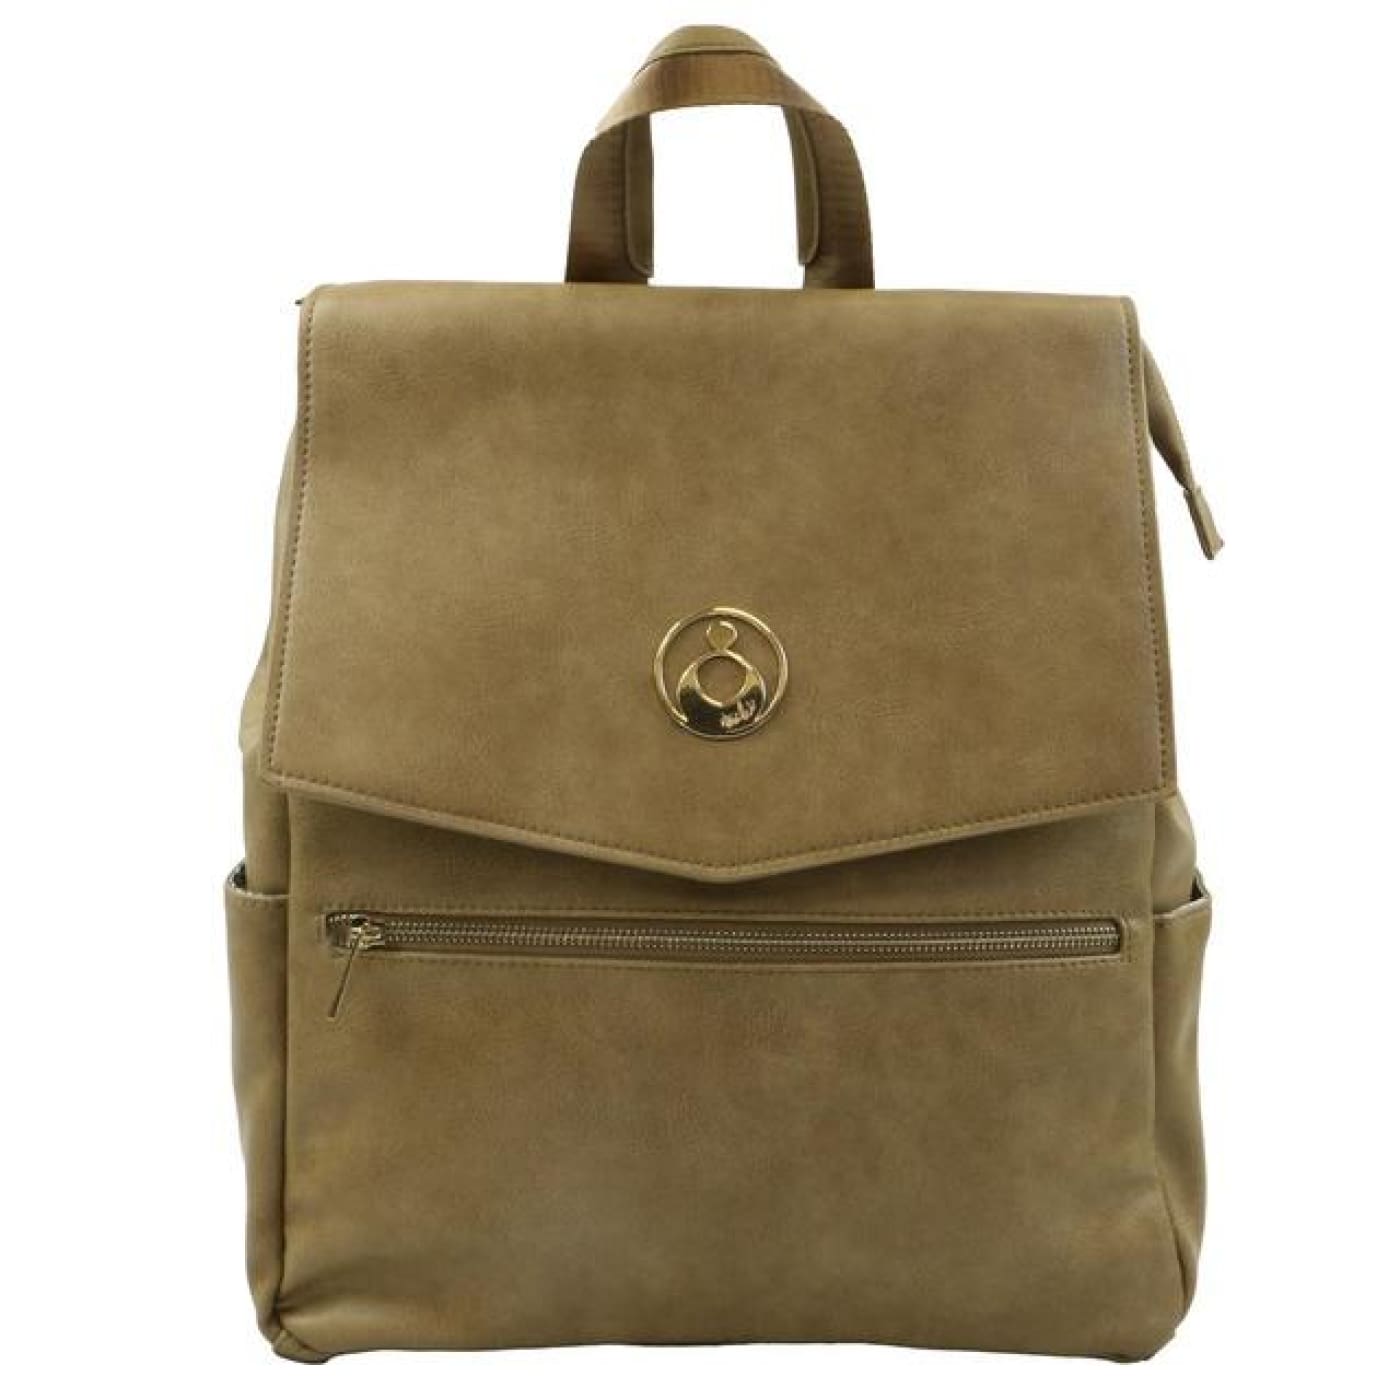 Isoki Hartley Backpack - Latte - Latte - ON THE GO - NAPPY BAGS/LUGGAGE